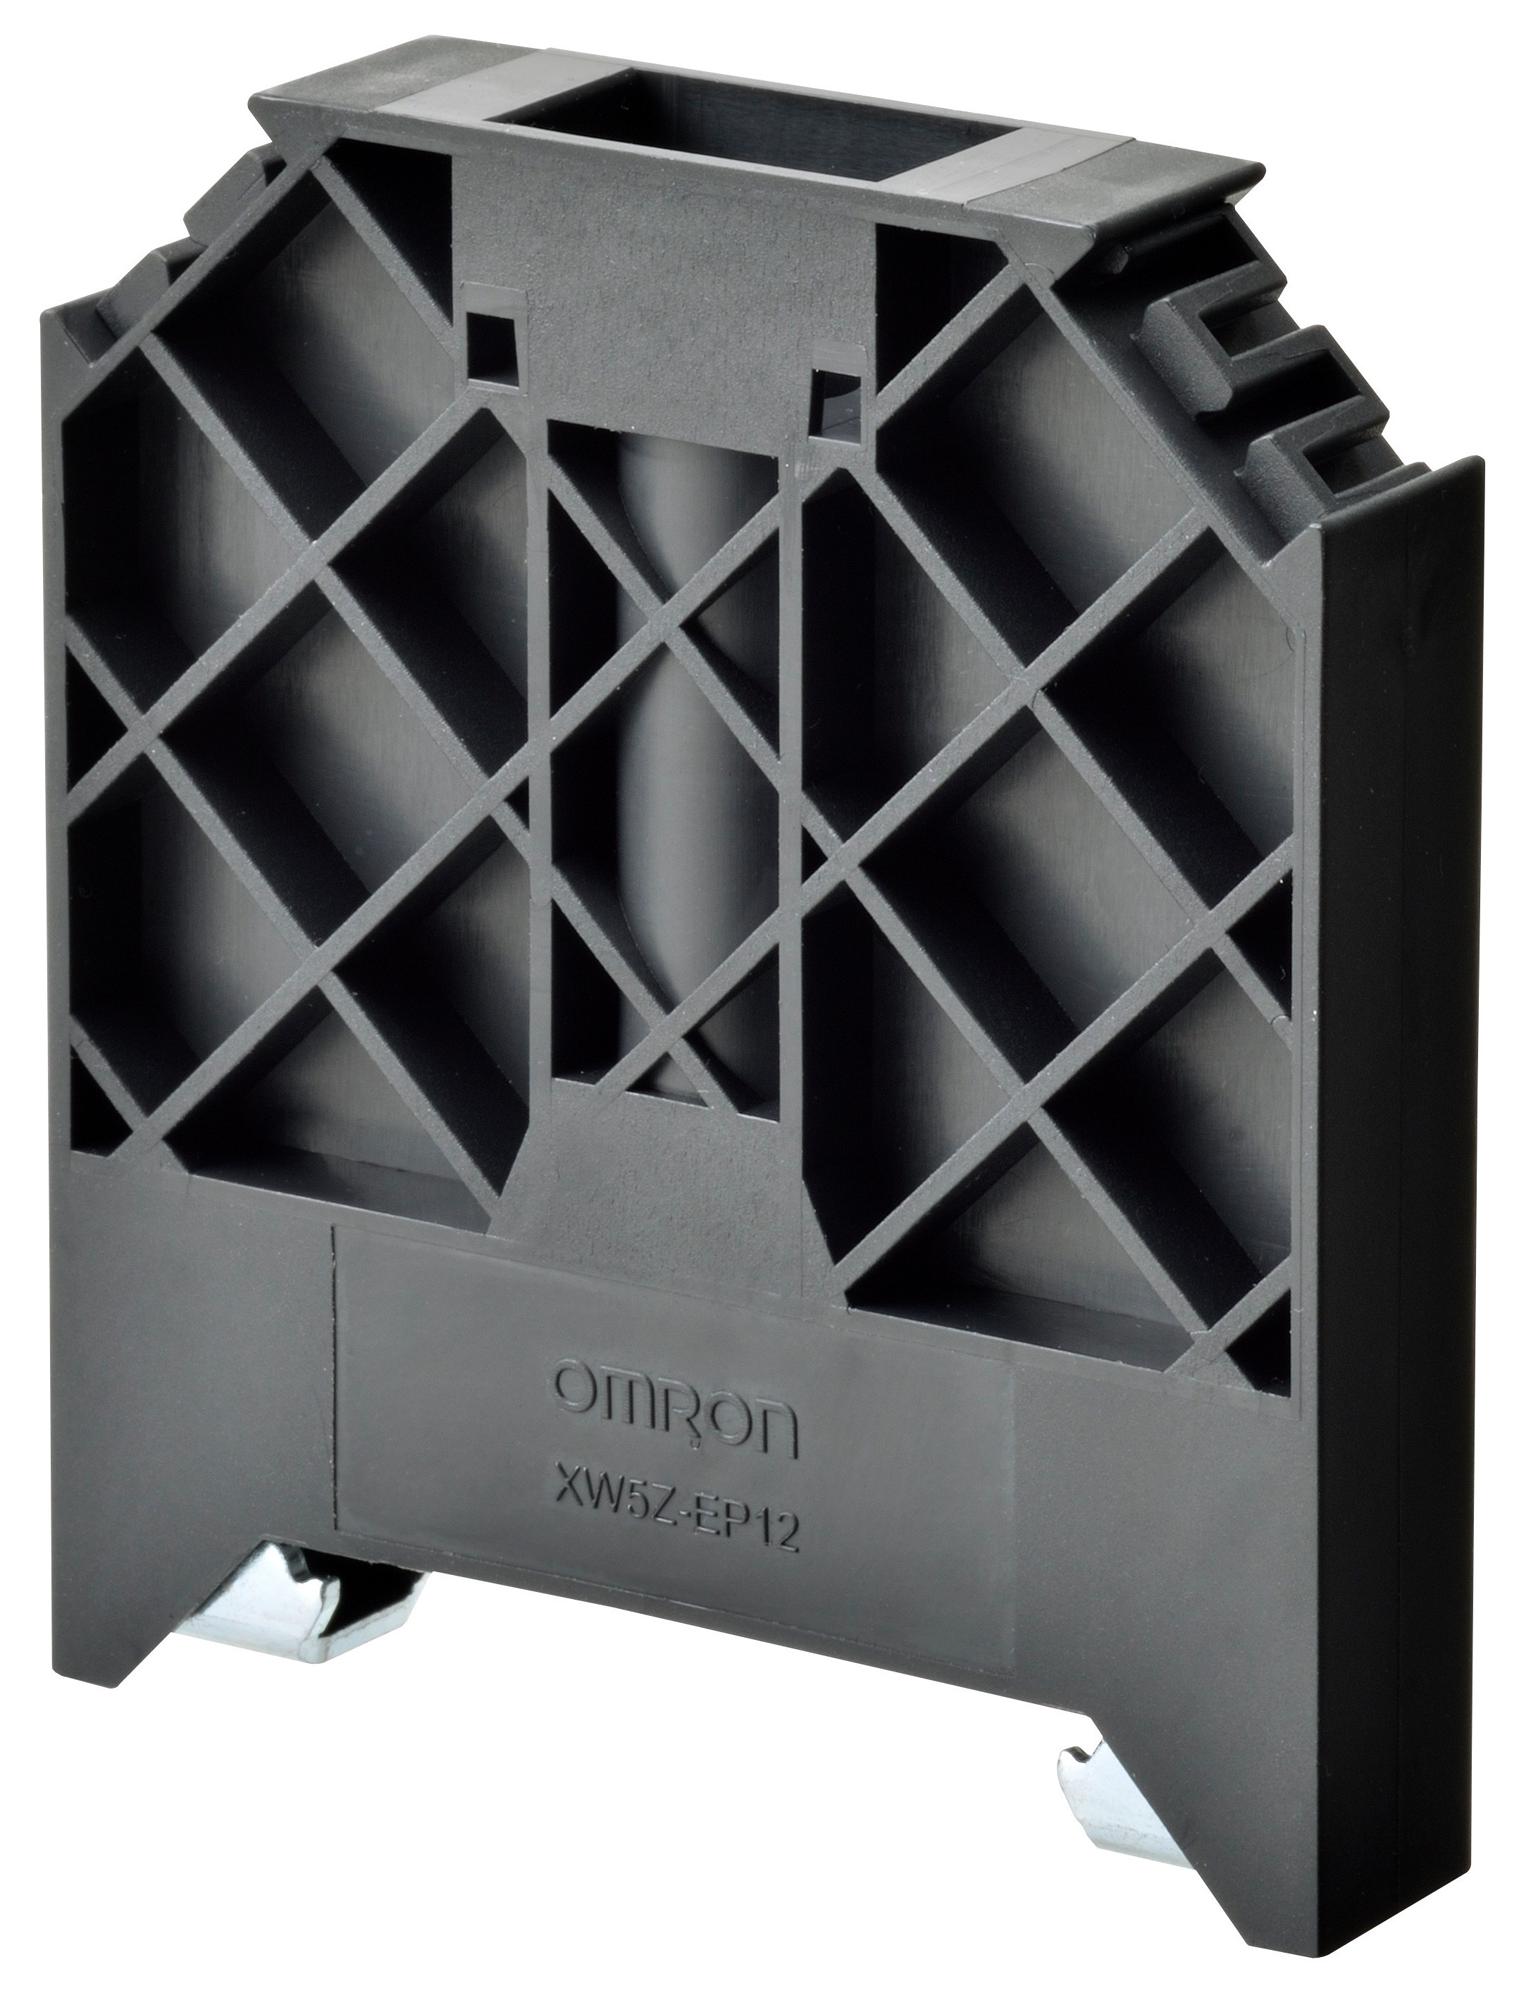 OMRON Terminal Block Accessories XW5Z-EP12 SEPARATOR PLATE, W-12MM OMRON 3441110 XW5Z-EP12